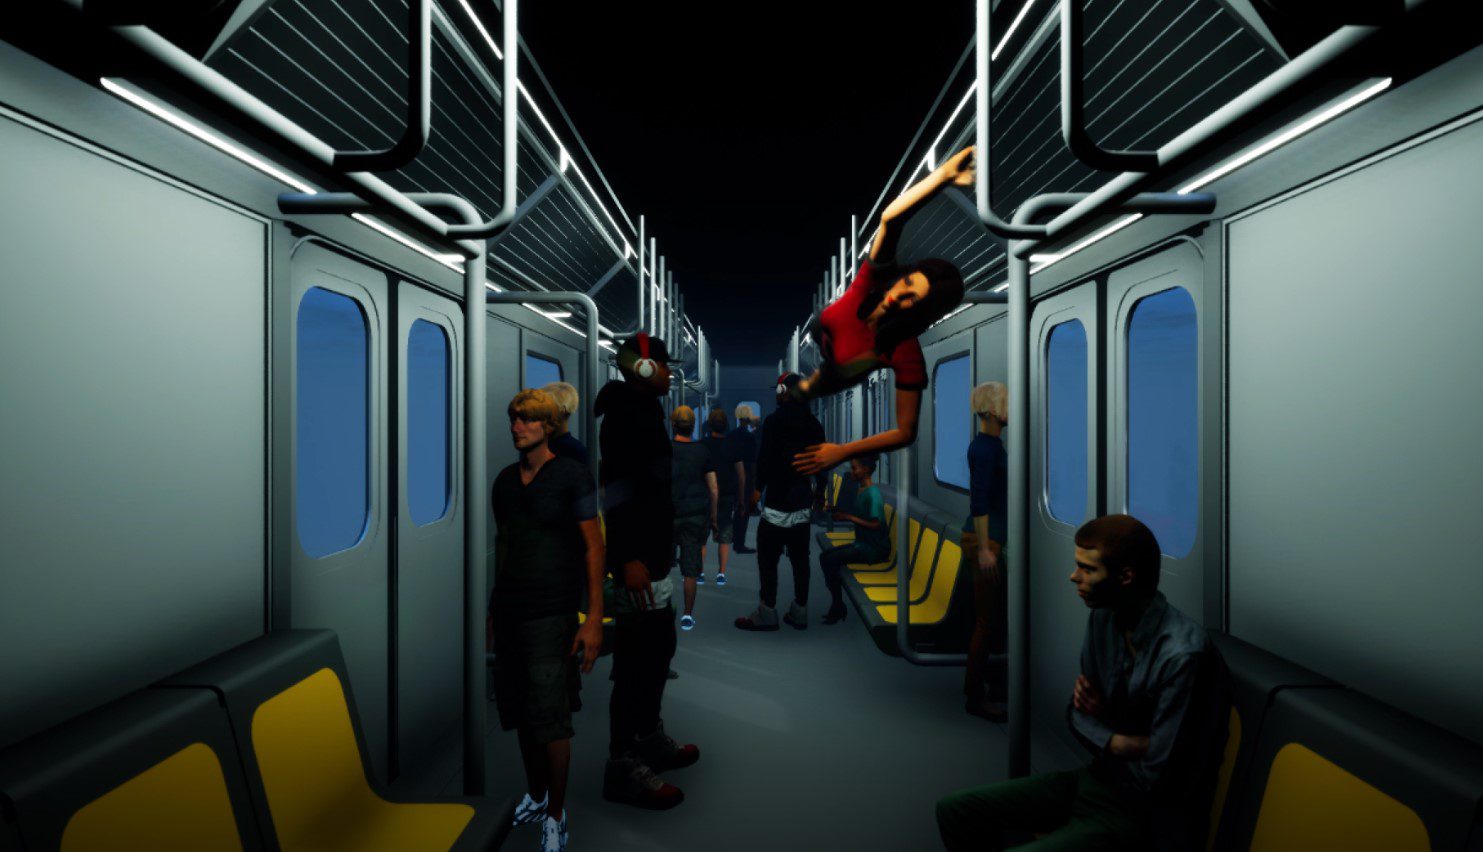 An underground carriage with people inside, with someone in the air